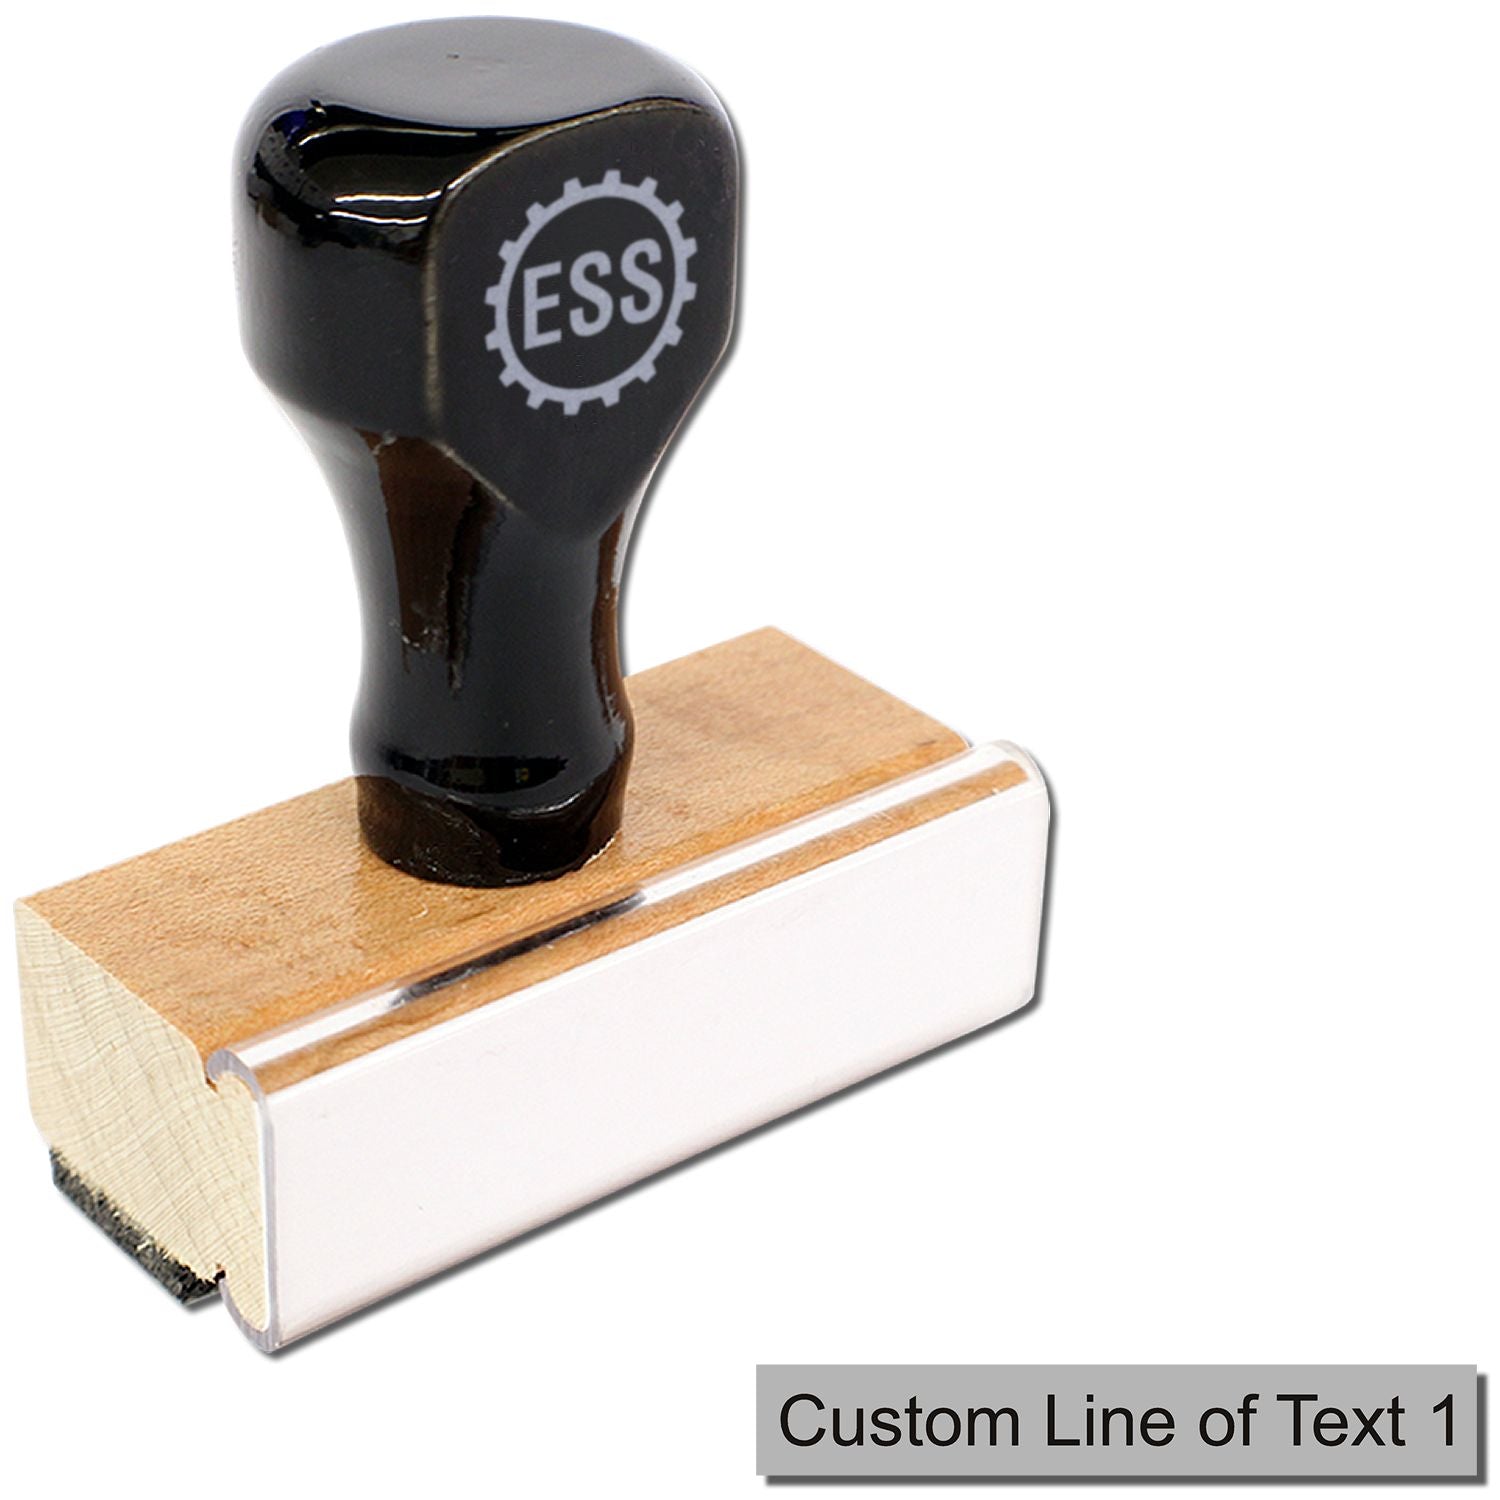 Promot Custom Stamp Up to 3 Lines of Personalized Text - Choose Font, Color, Pad, Self-Inking for Return Address & Mailing Address, Office Stamps